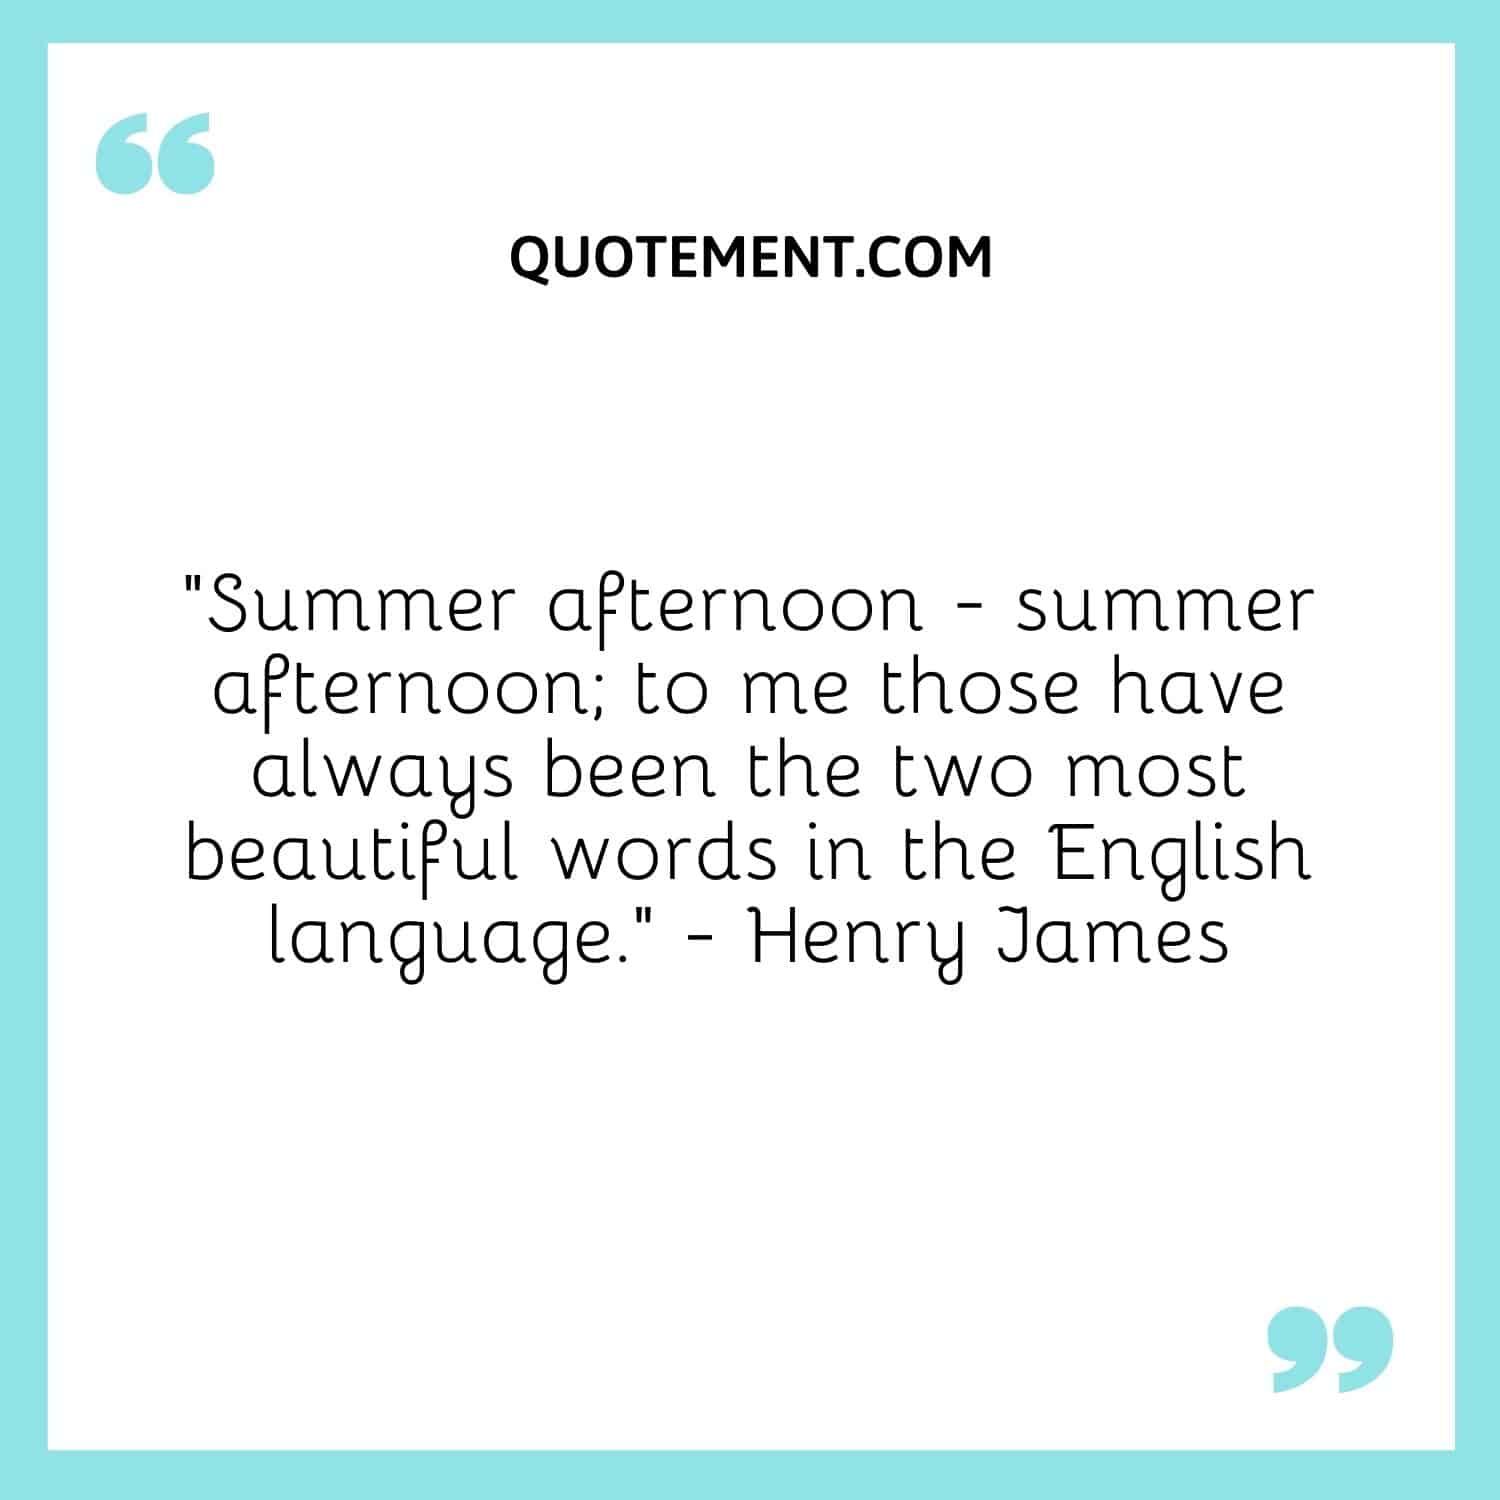 Summer afternoon — summer afternoon; to me those have always been the two most beautiful words in the English language. — Henry James